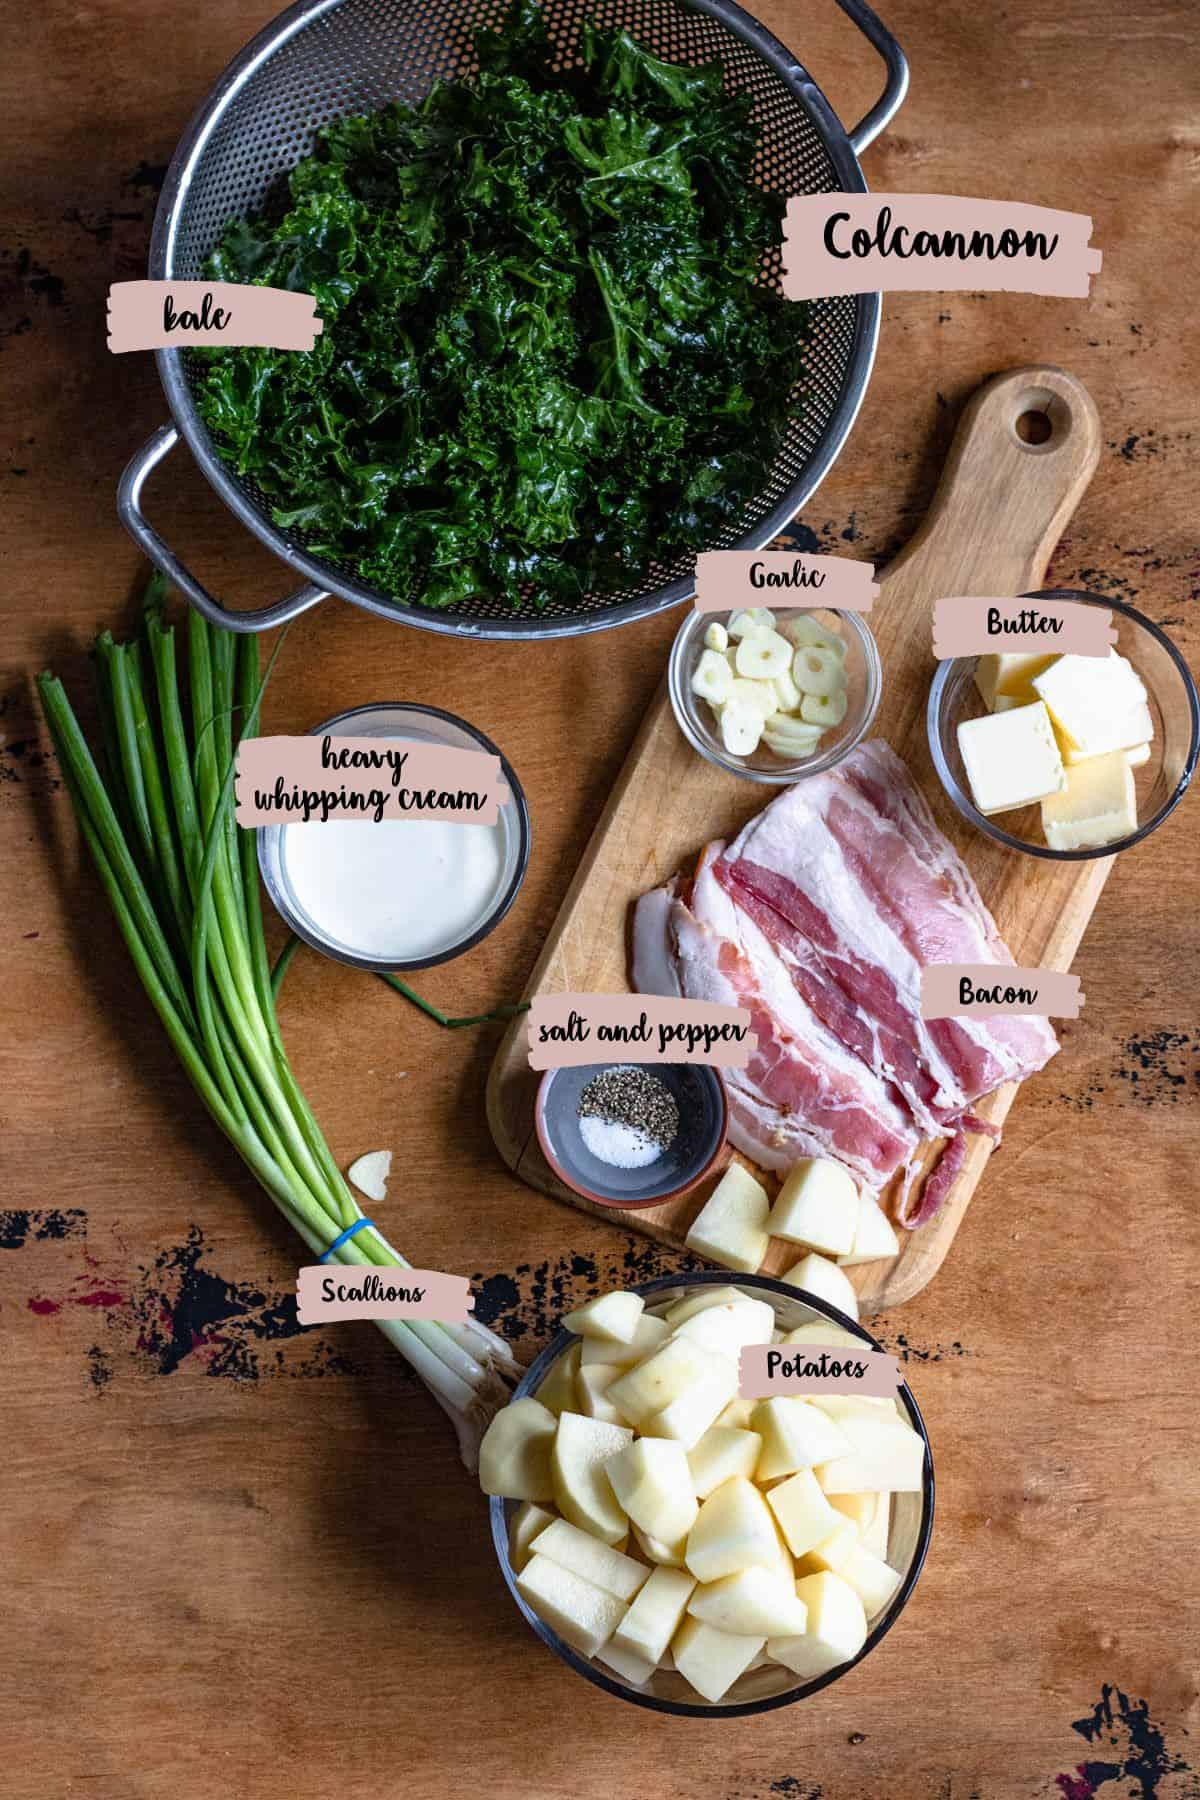 Ingredients shown that are needed to prepare colcannon. 